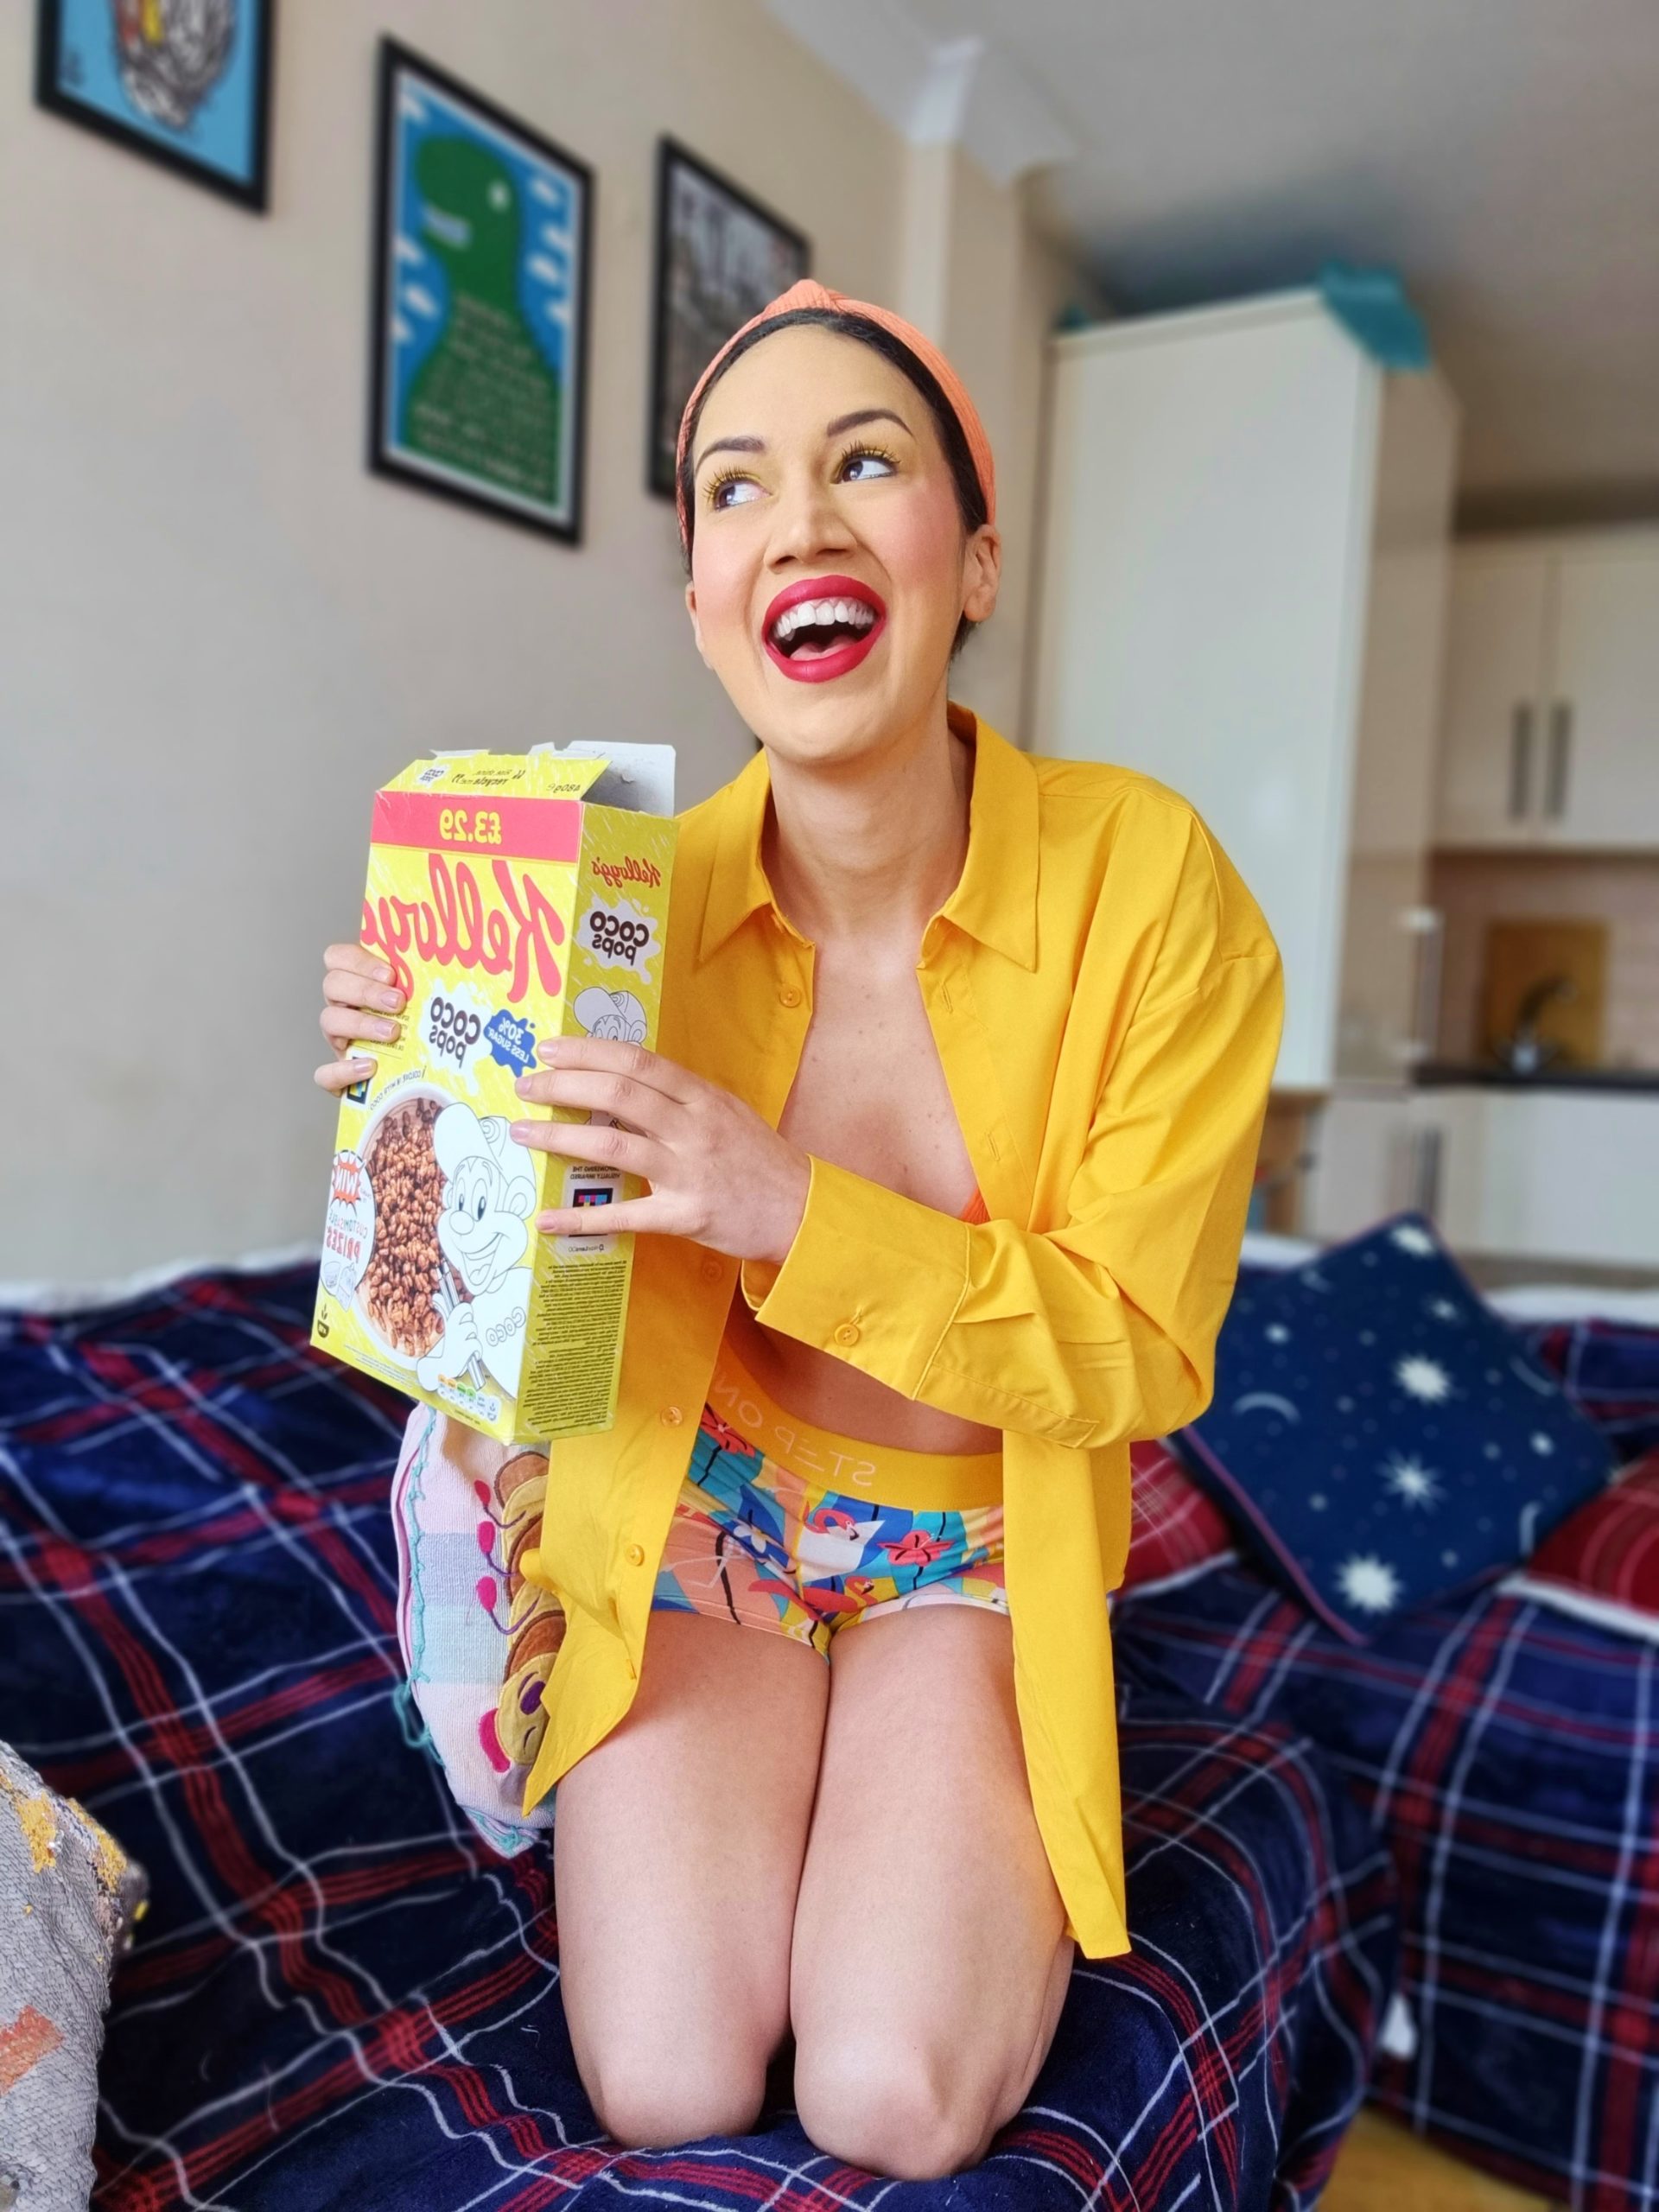 <img src="ana.jpg" alt="ana smiling in yellow button shirt and boxers "> 